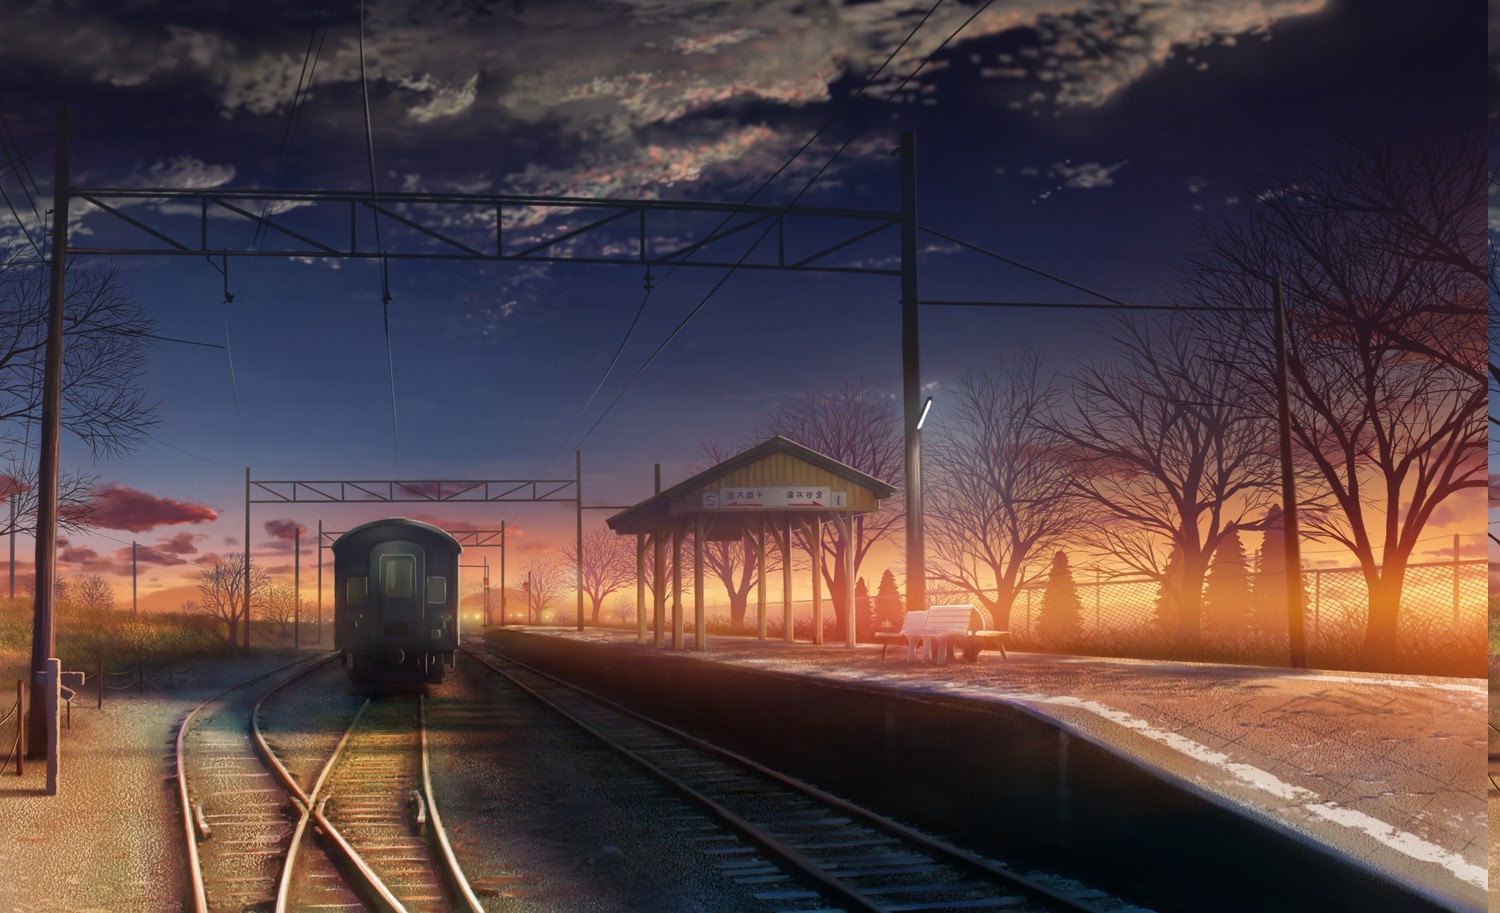 anime, Railway, Train Station, Sunset Wallpapers HD / Desktop and